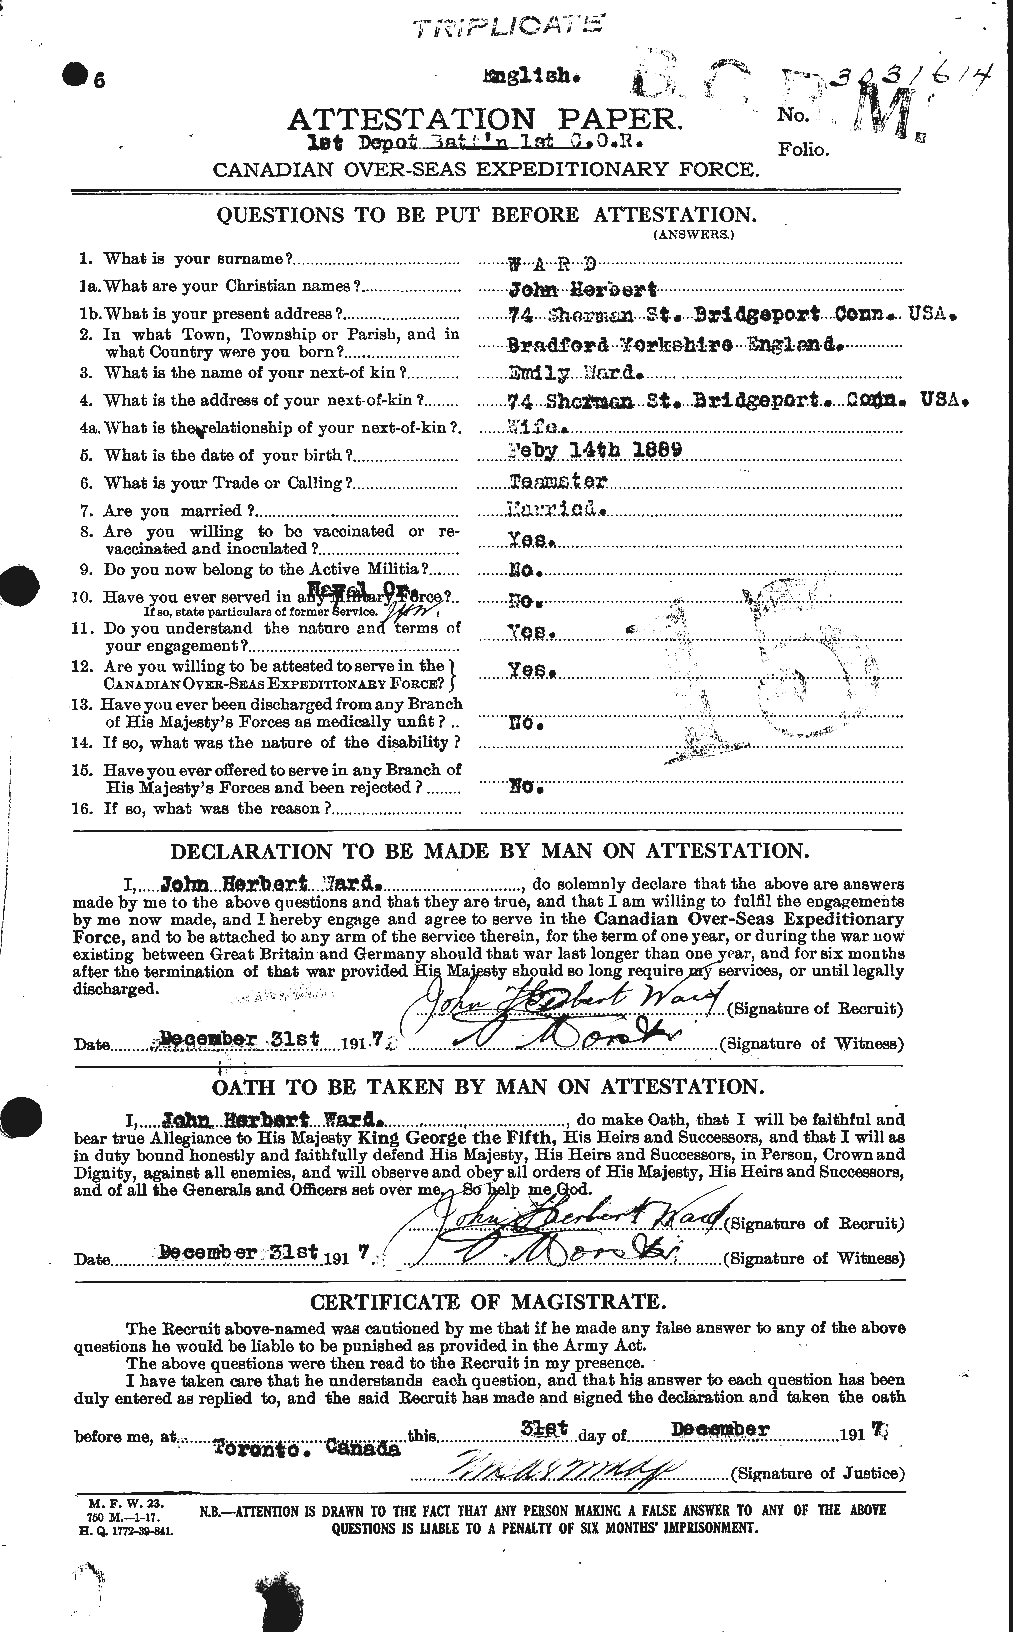 Personnel Records of the First World War - CEF 659527a